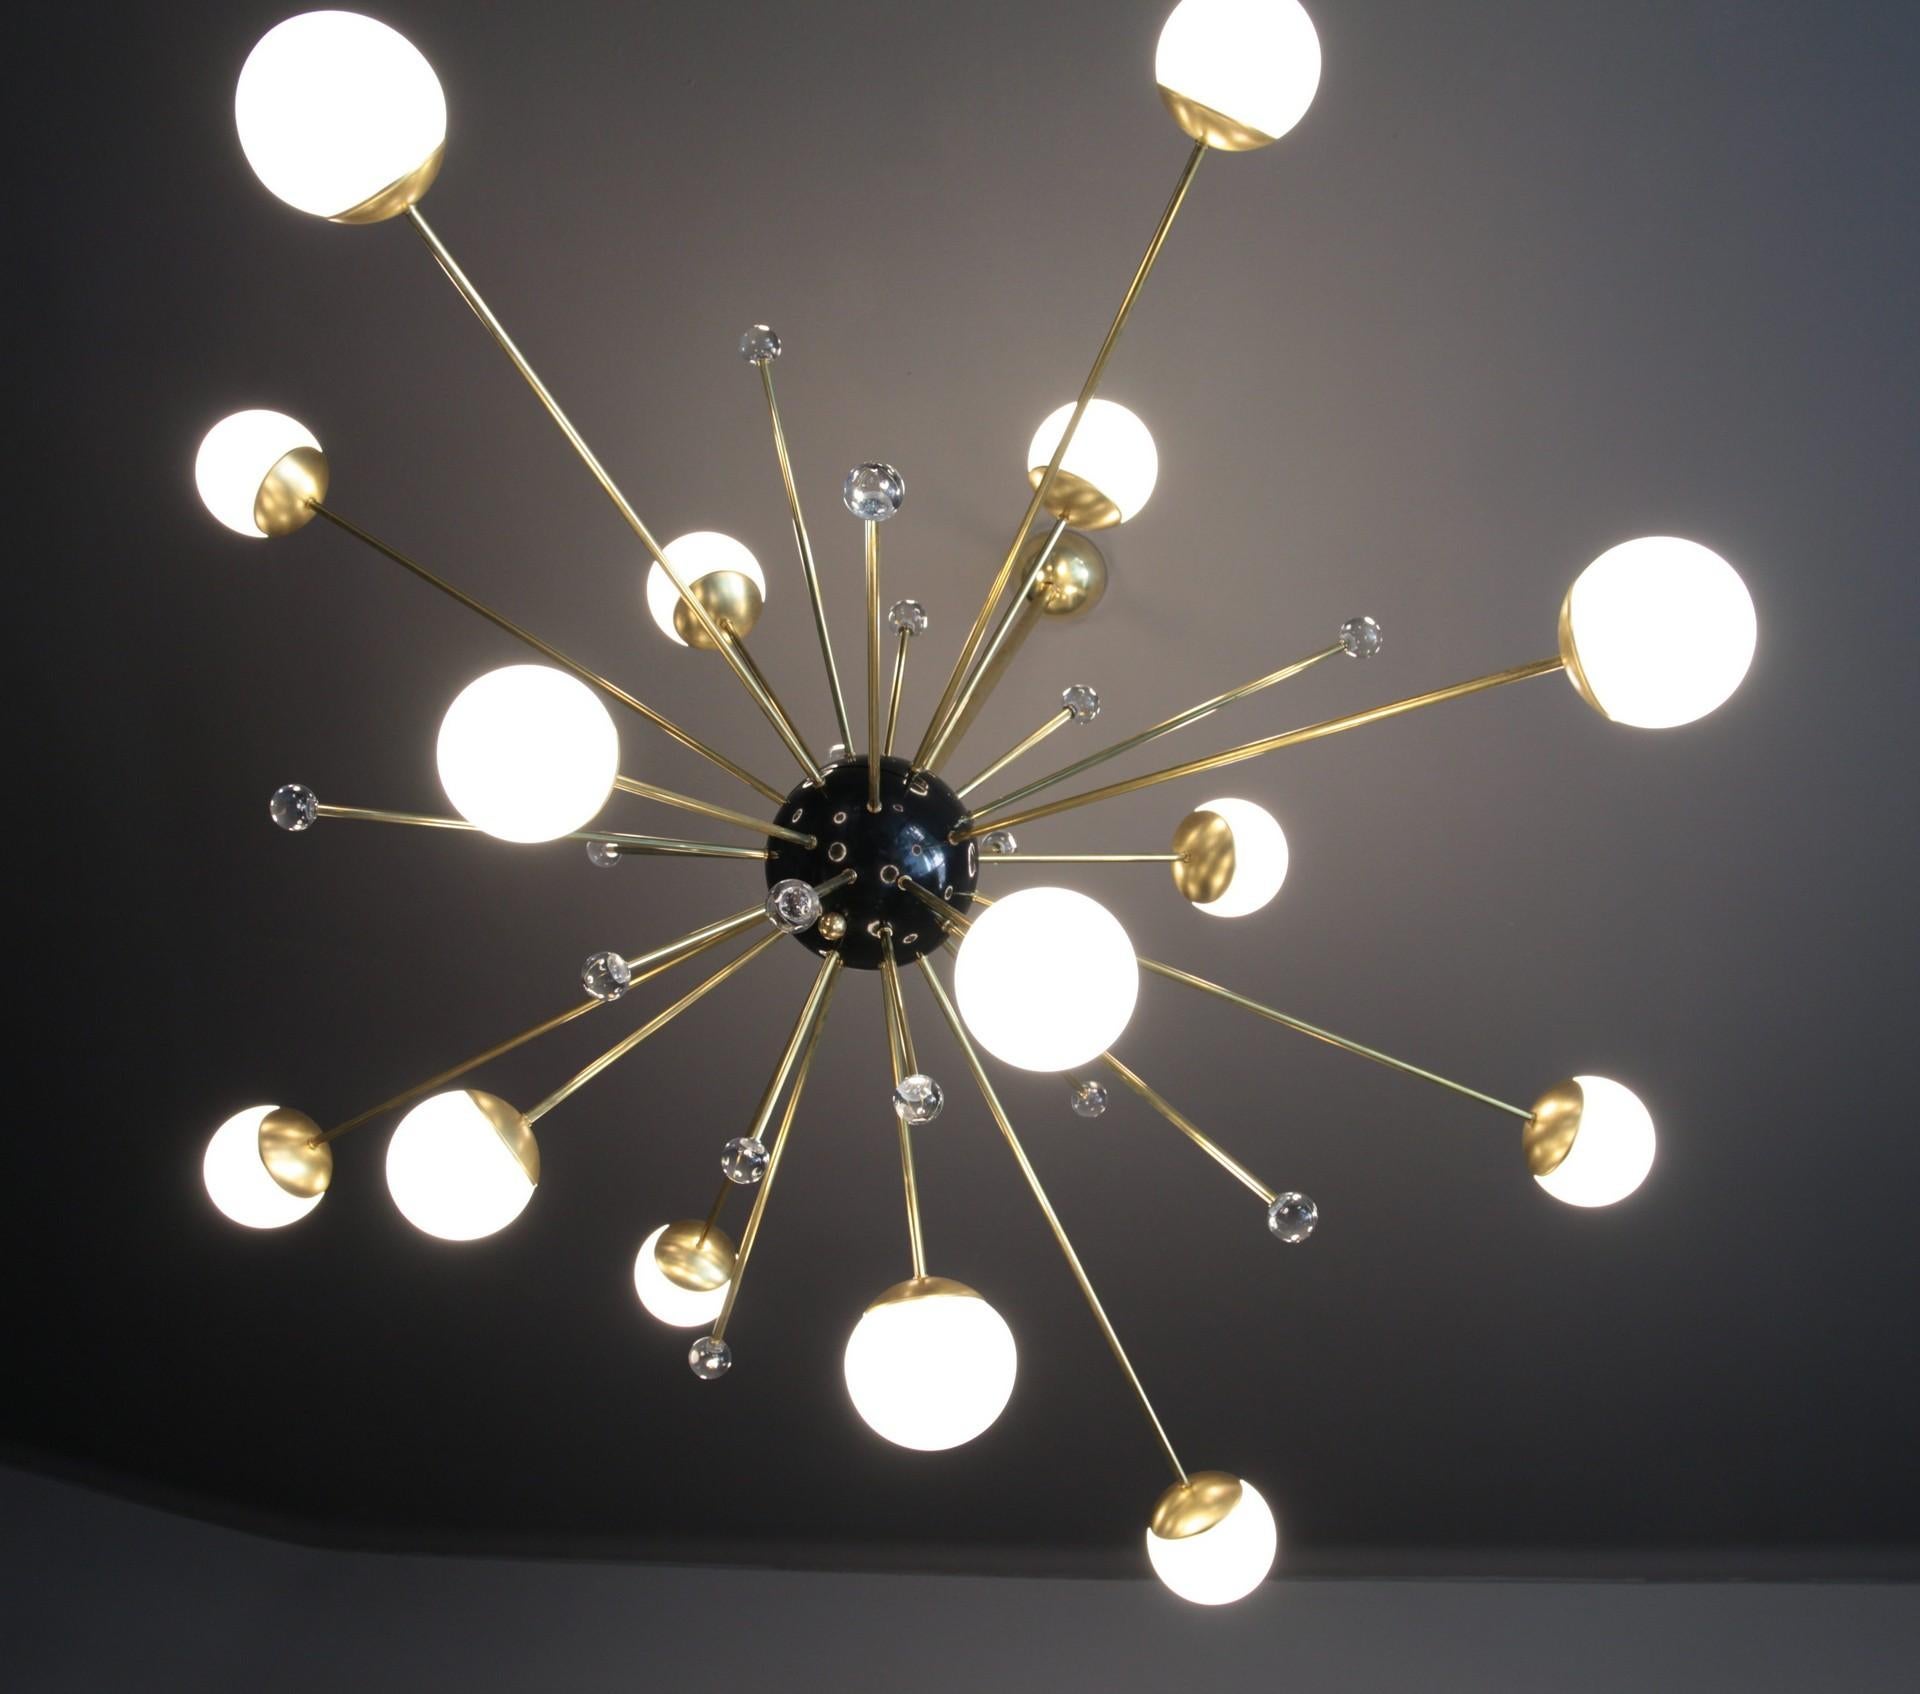 A wonderful design that enhances the sputnik design. Here the light comes from 16 opaline Venetian glass blown spheres. There are also correspondent massiccio glass globes that are refracting the light creating a magic play with light. 

The black